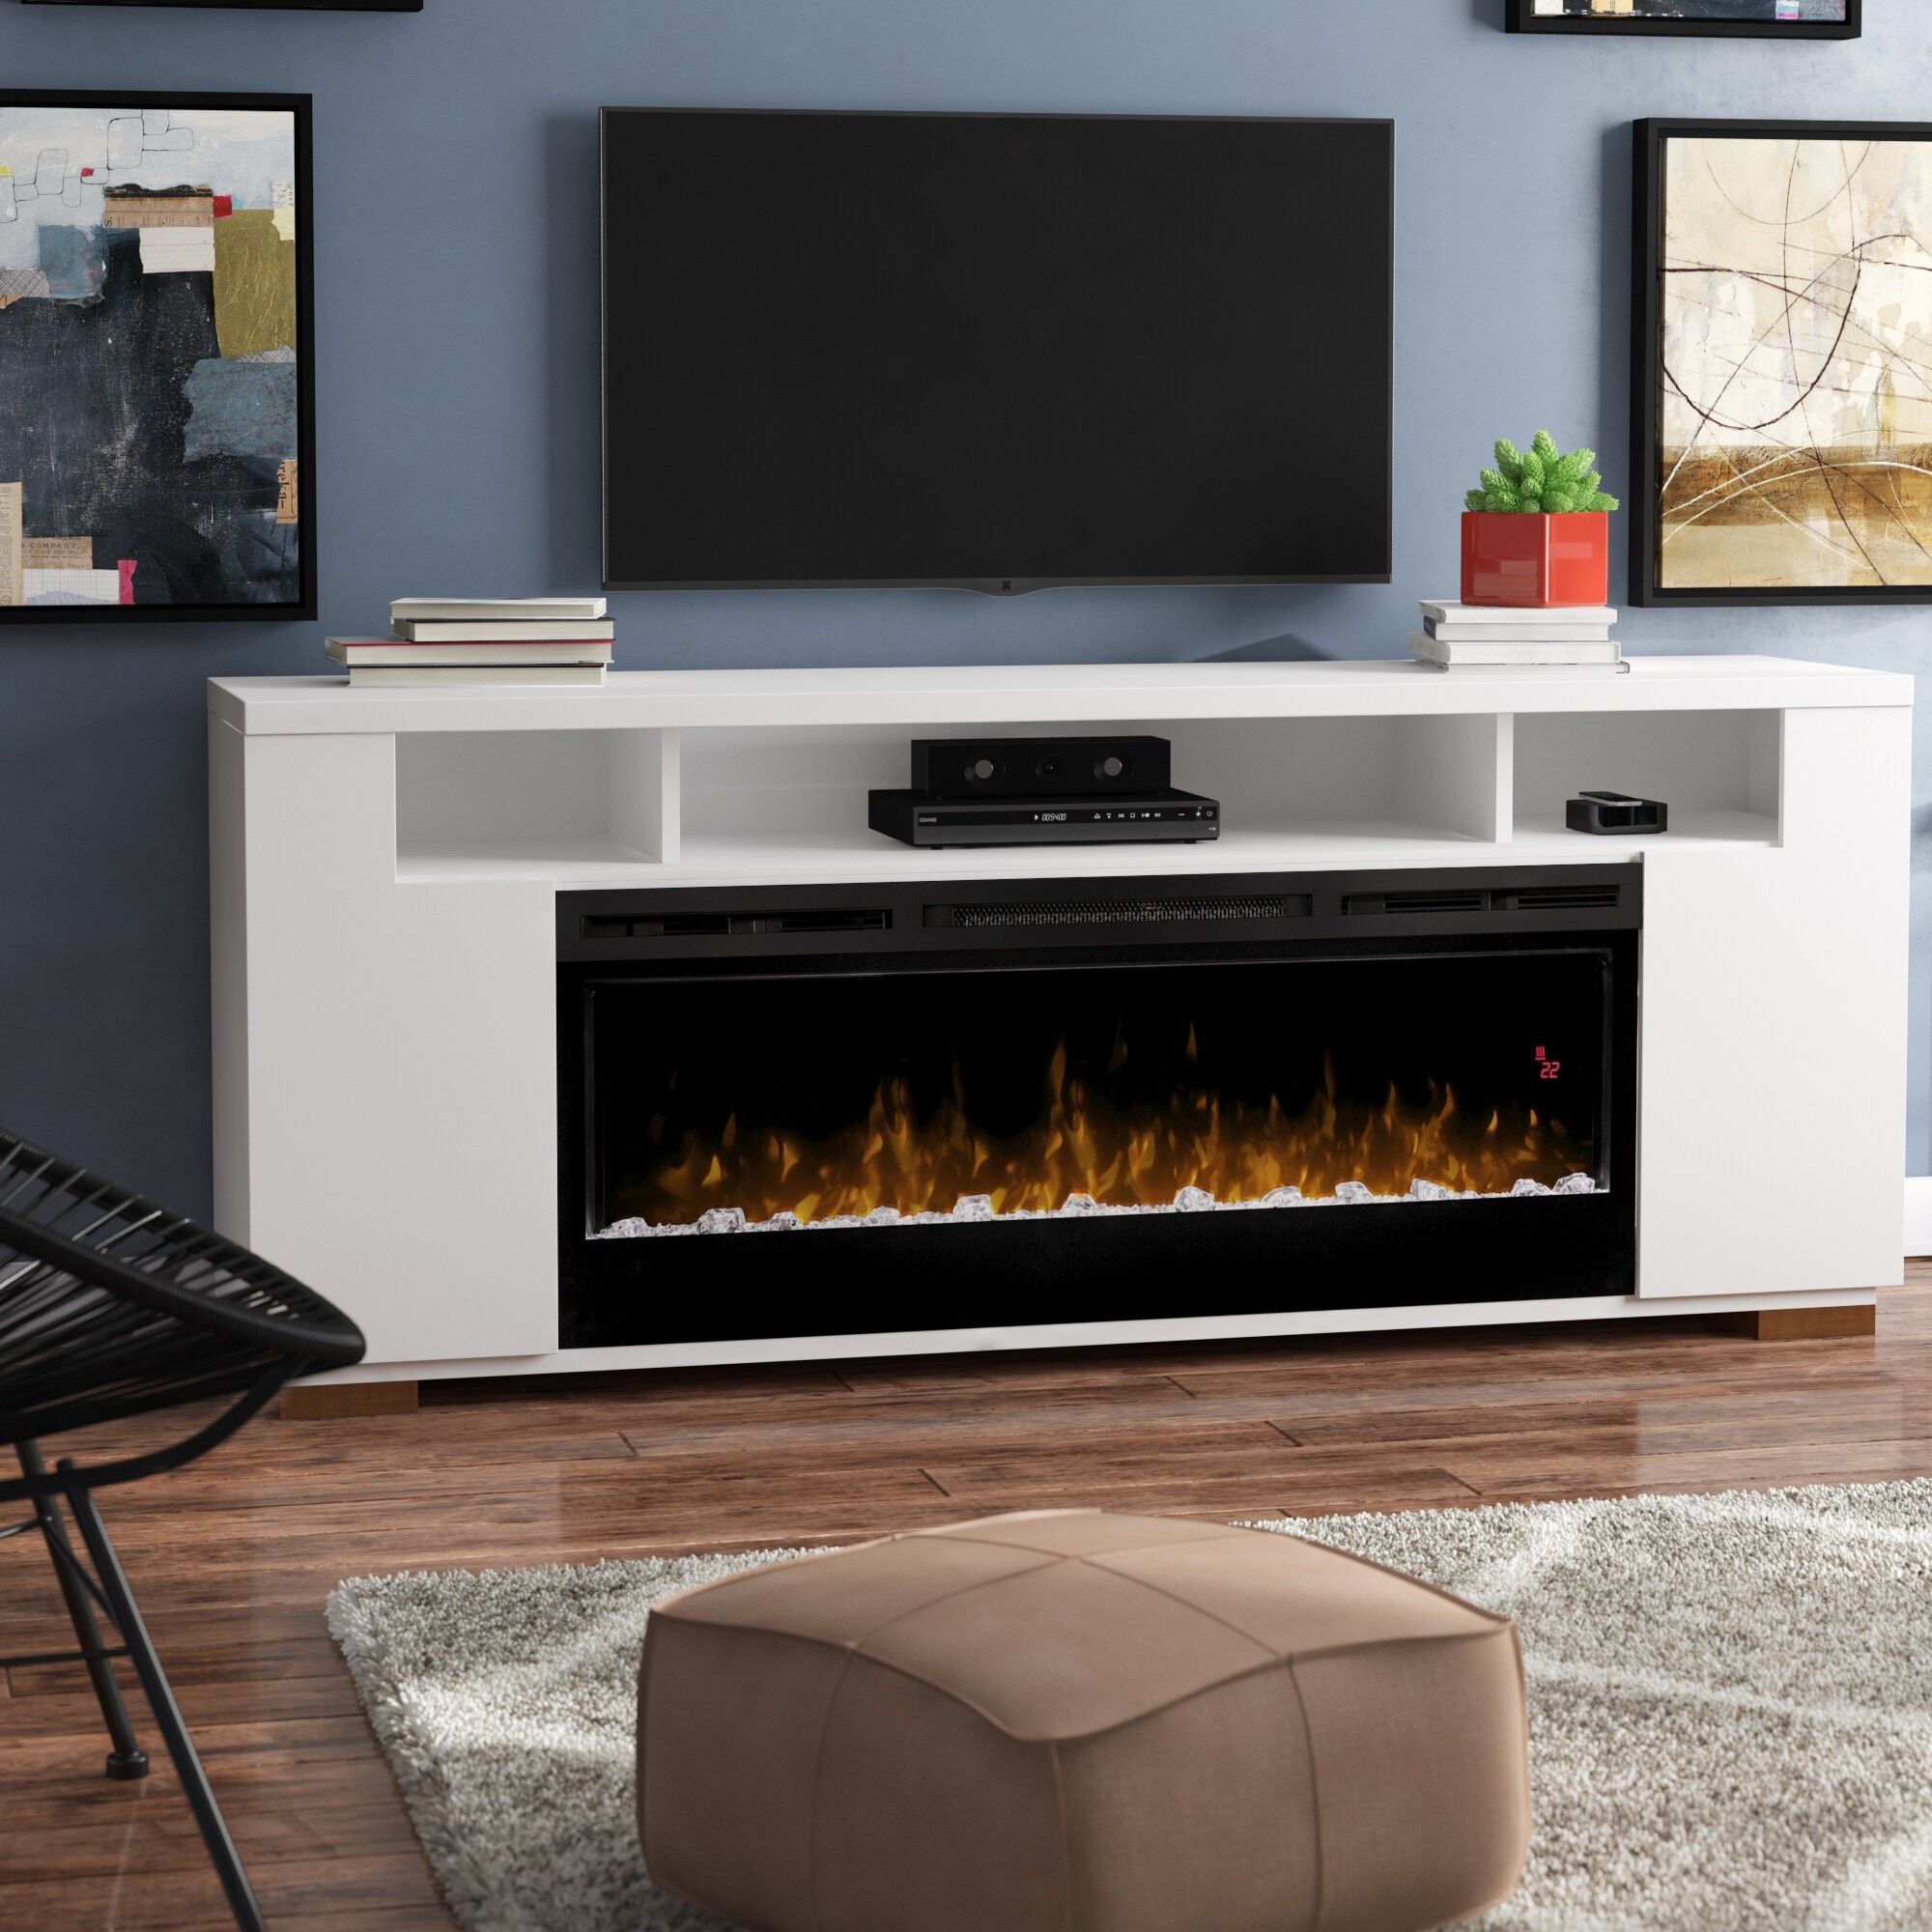 How To Choose A Tv Stand Fireplace – Foter With Modern Fireplace Tv Stands (Gallery 8 of 20)